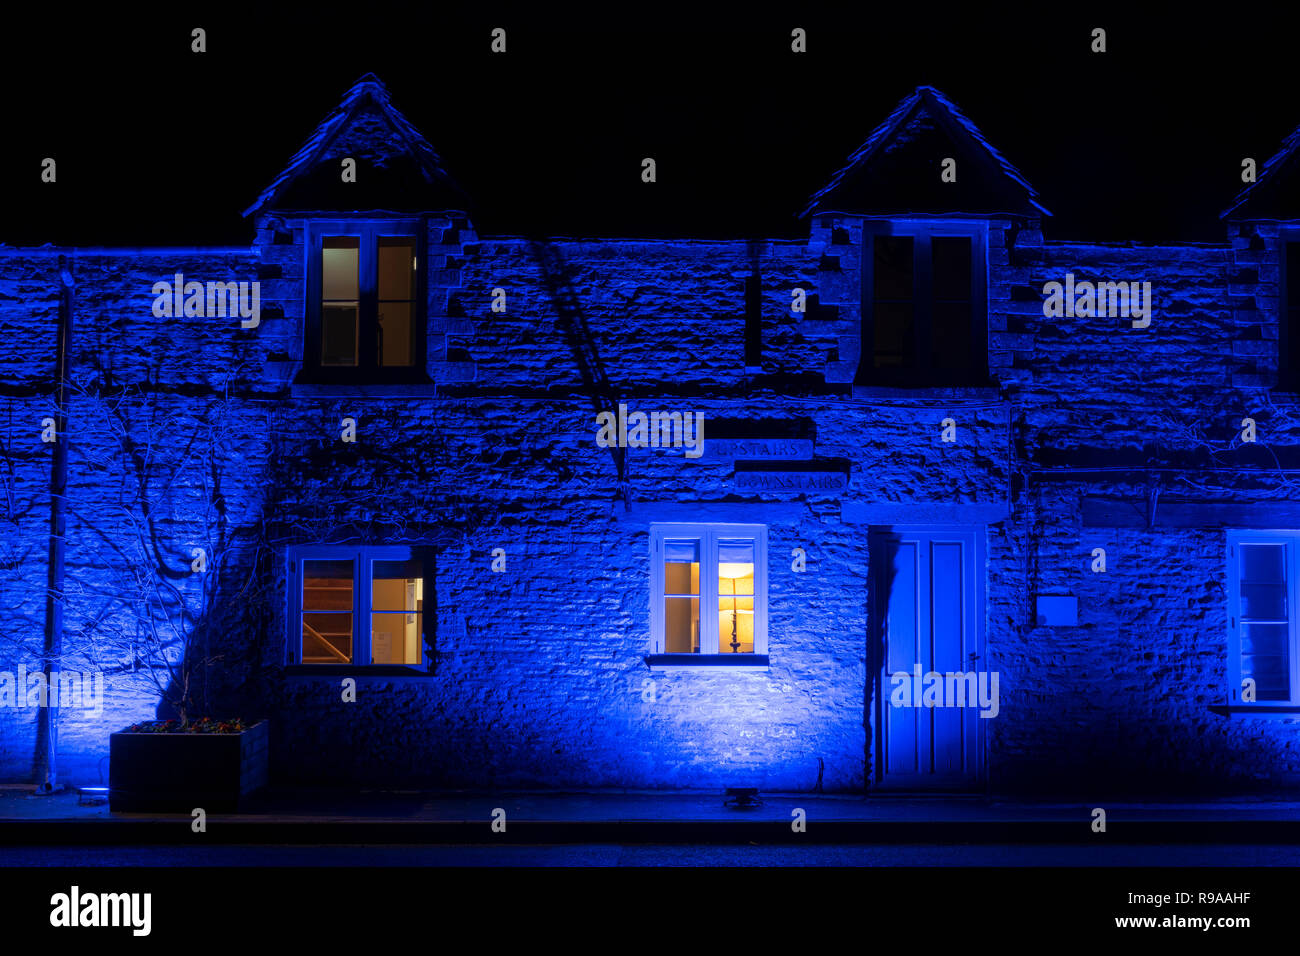 The Crown of Crucis country inn and hotel at lit by blue lights night. Ampney Crucis, Cotswolds, Cirencester, Gloucestershire, England Stock Photo